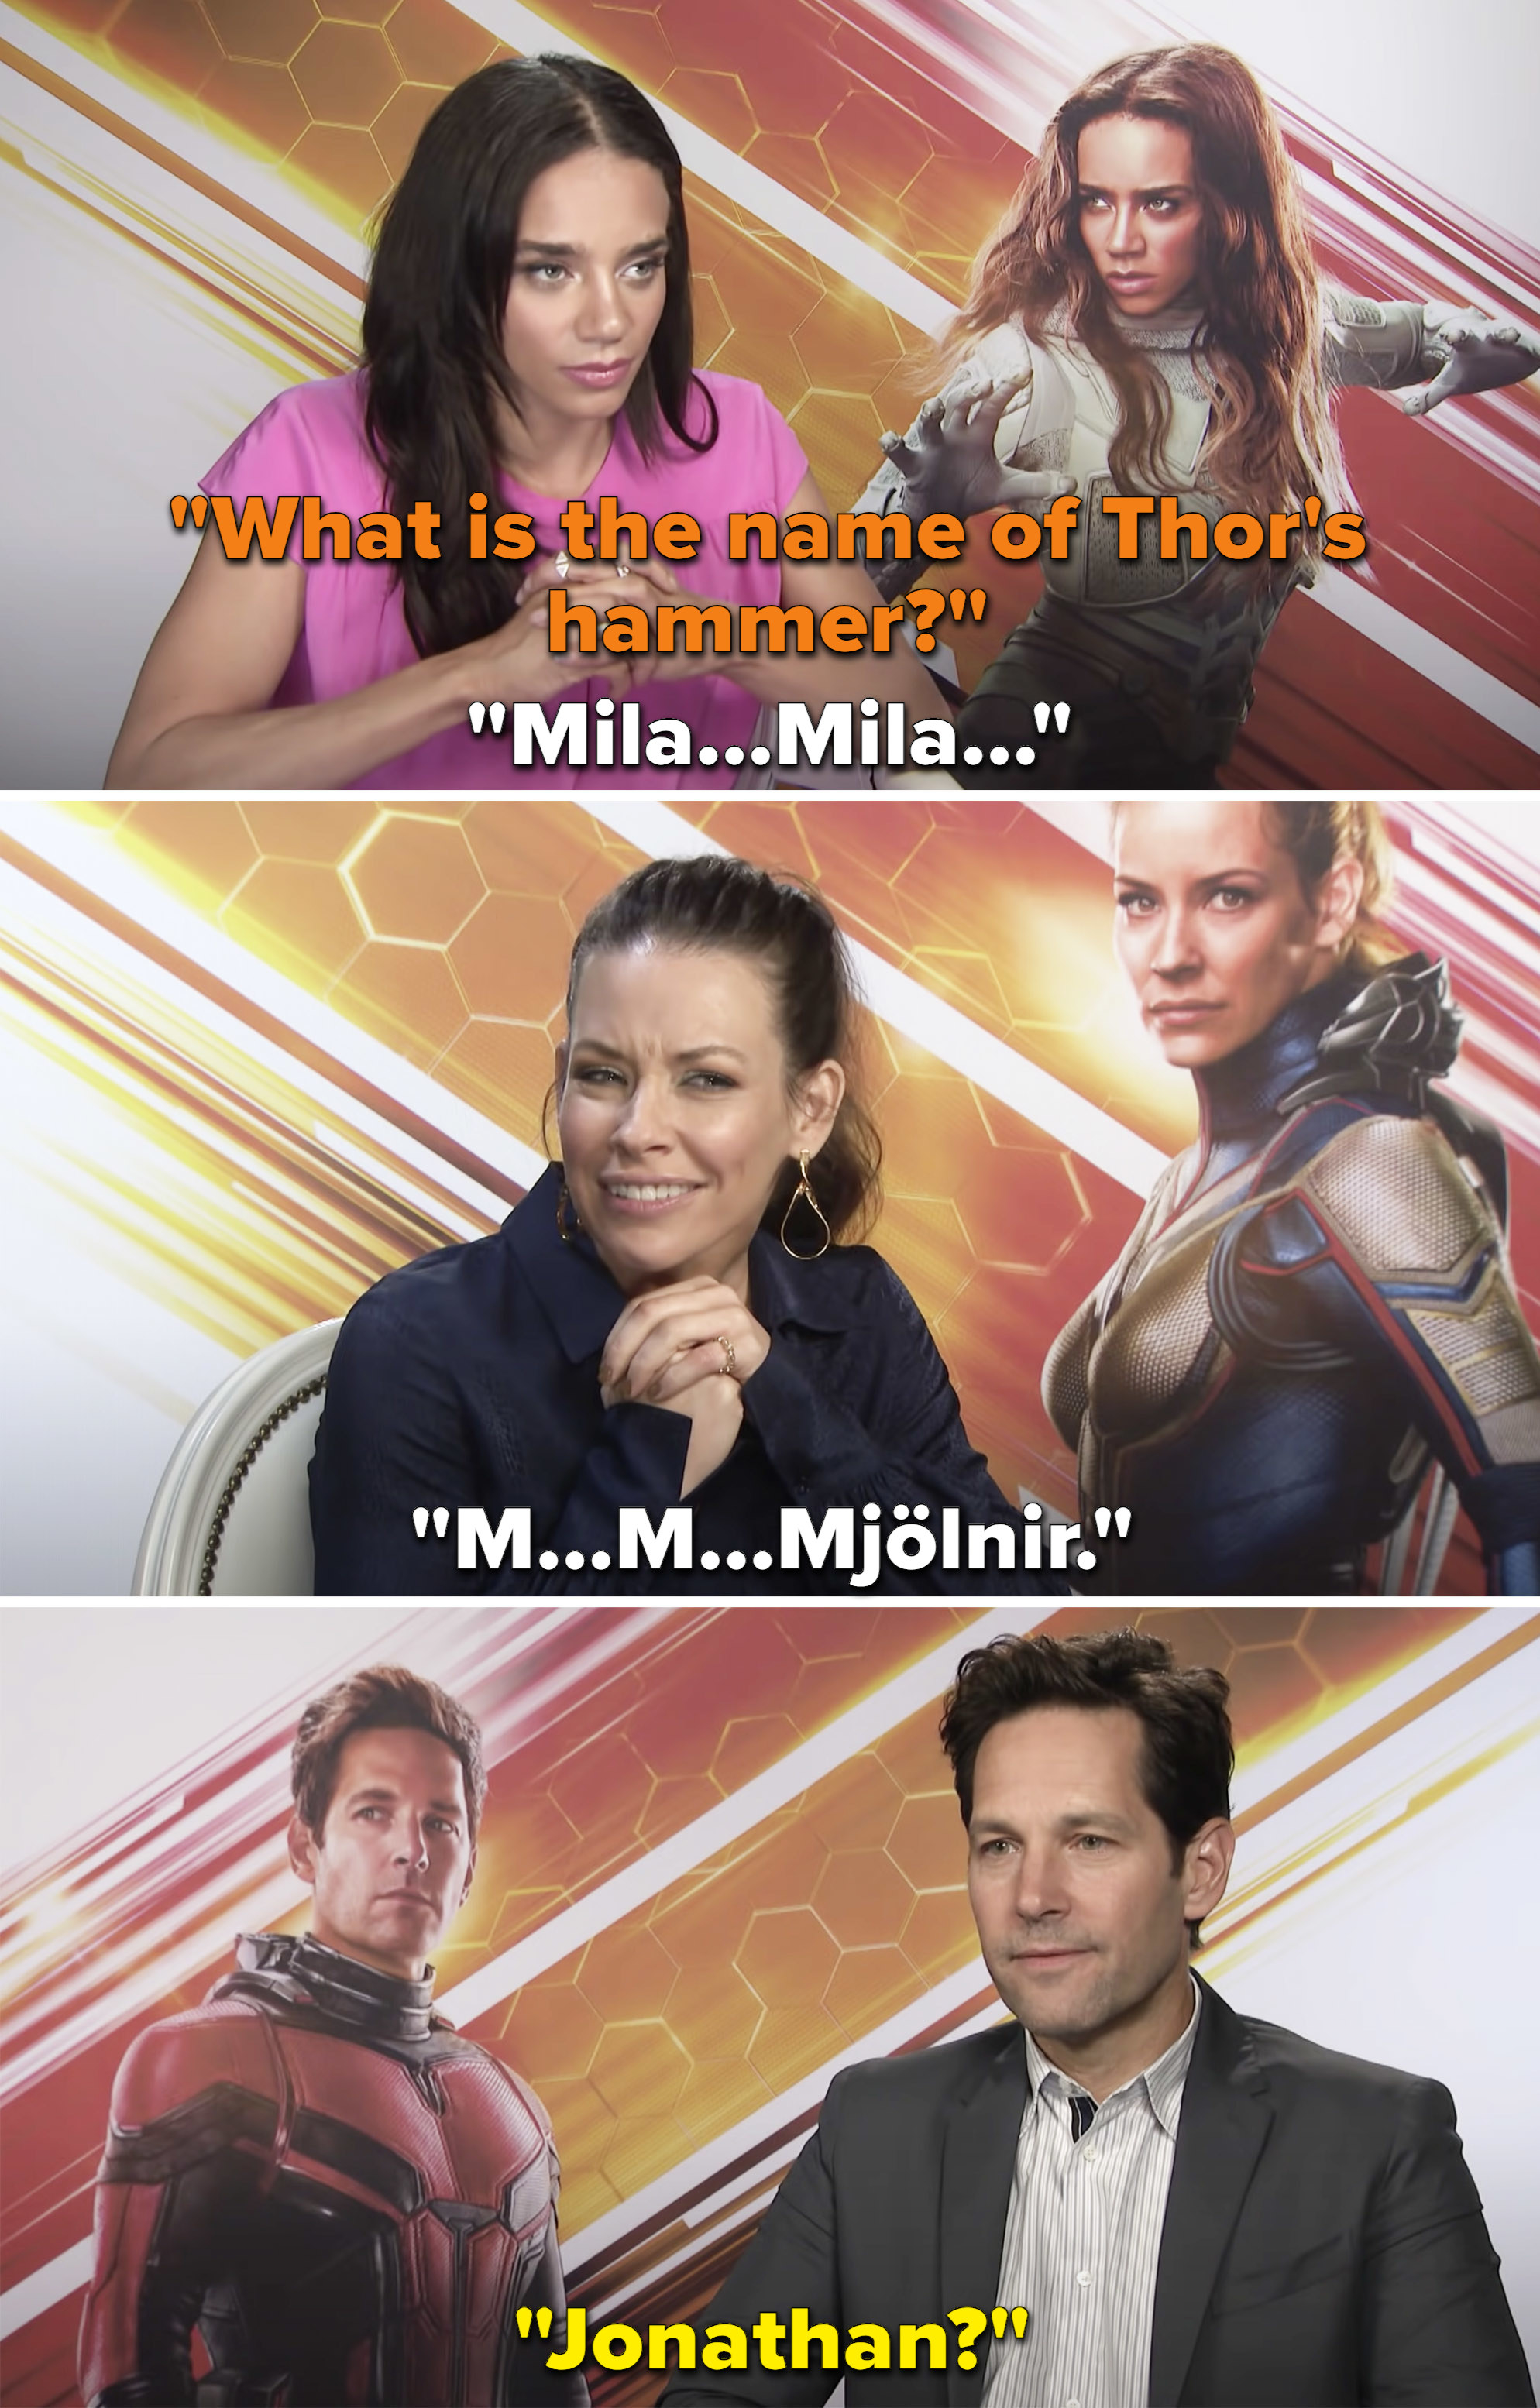 Paul Rudd answering &quot;Jonathan&quot; when asked what the name of Thor&#x27;s hammer is